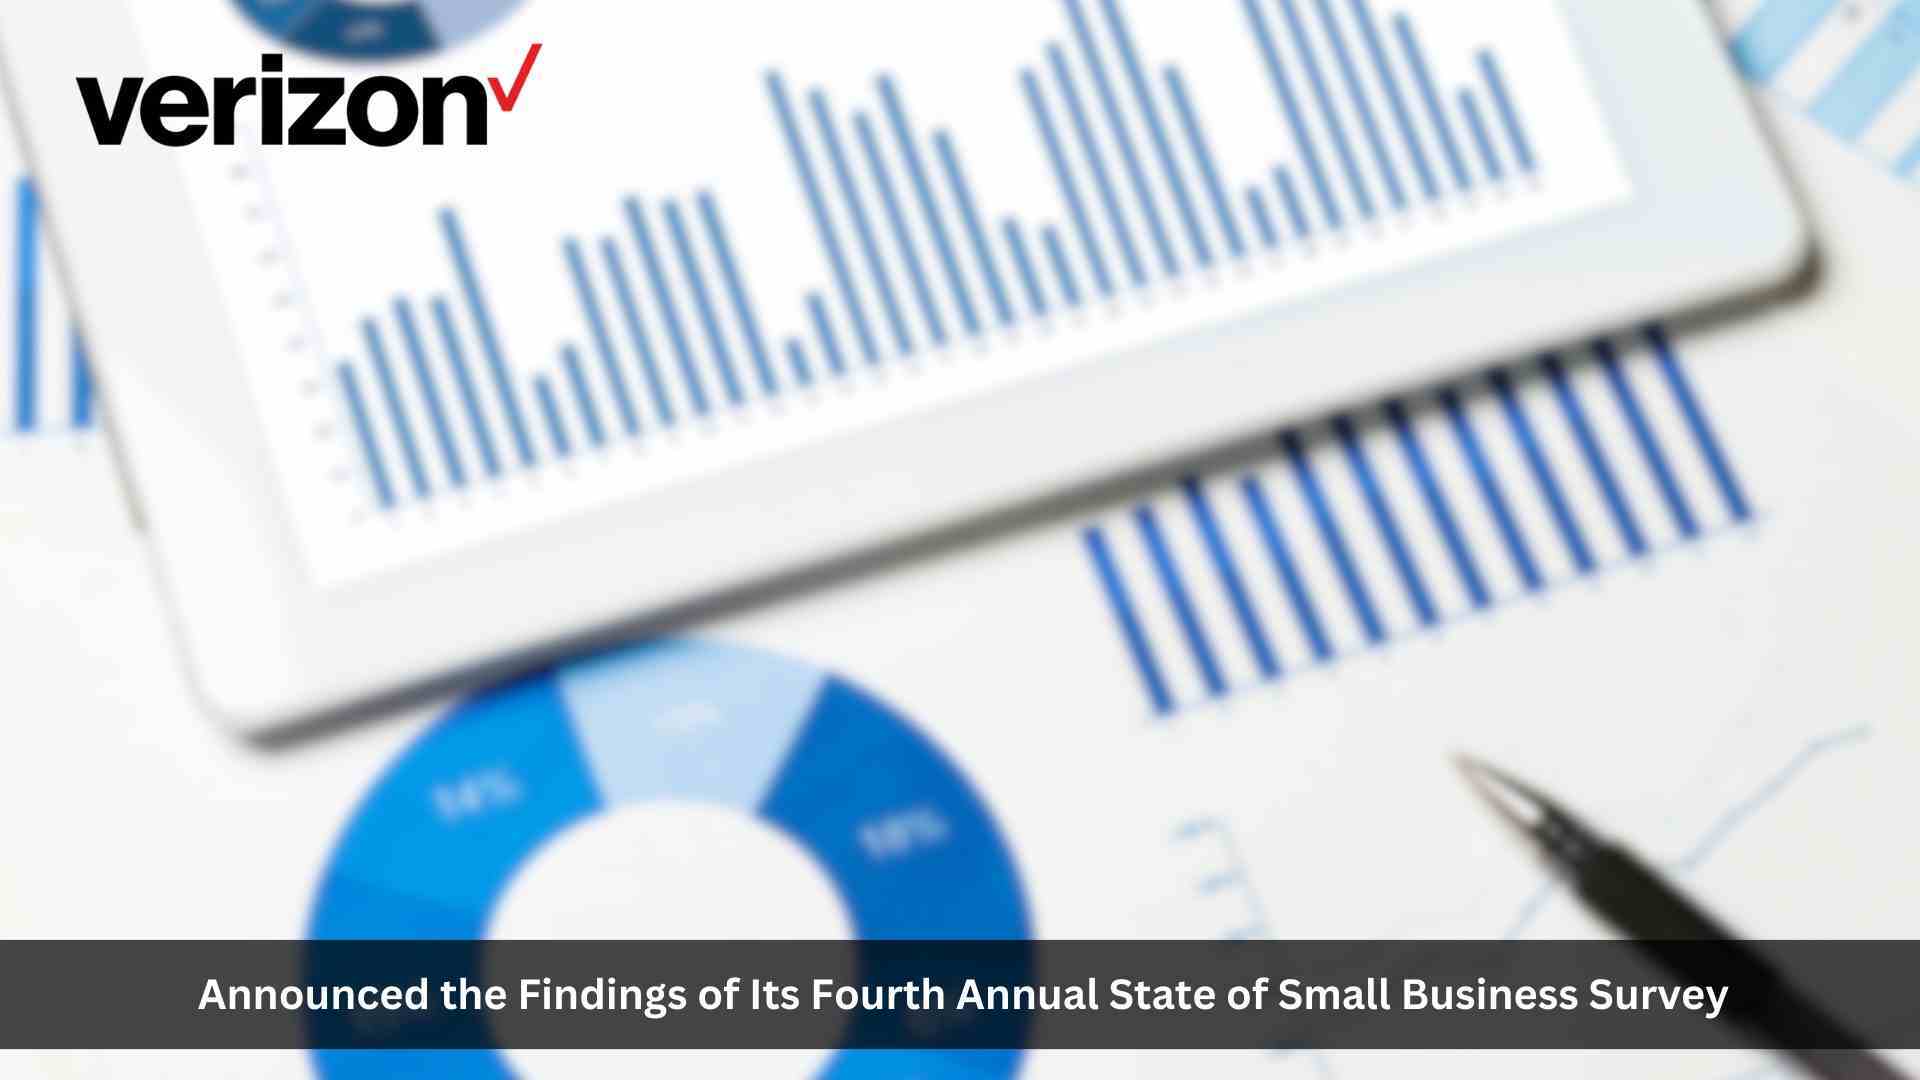 Verizon Annual State of Small Business Survey finds small businesses want AI in challenging economy